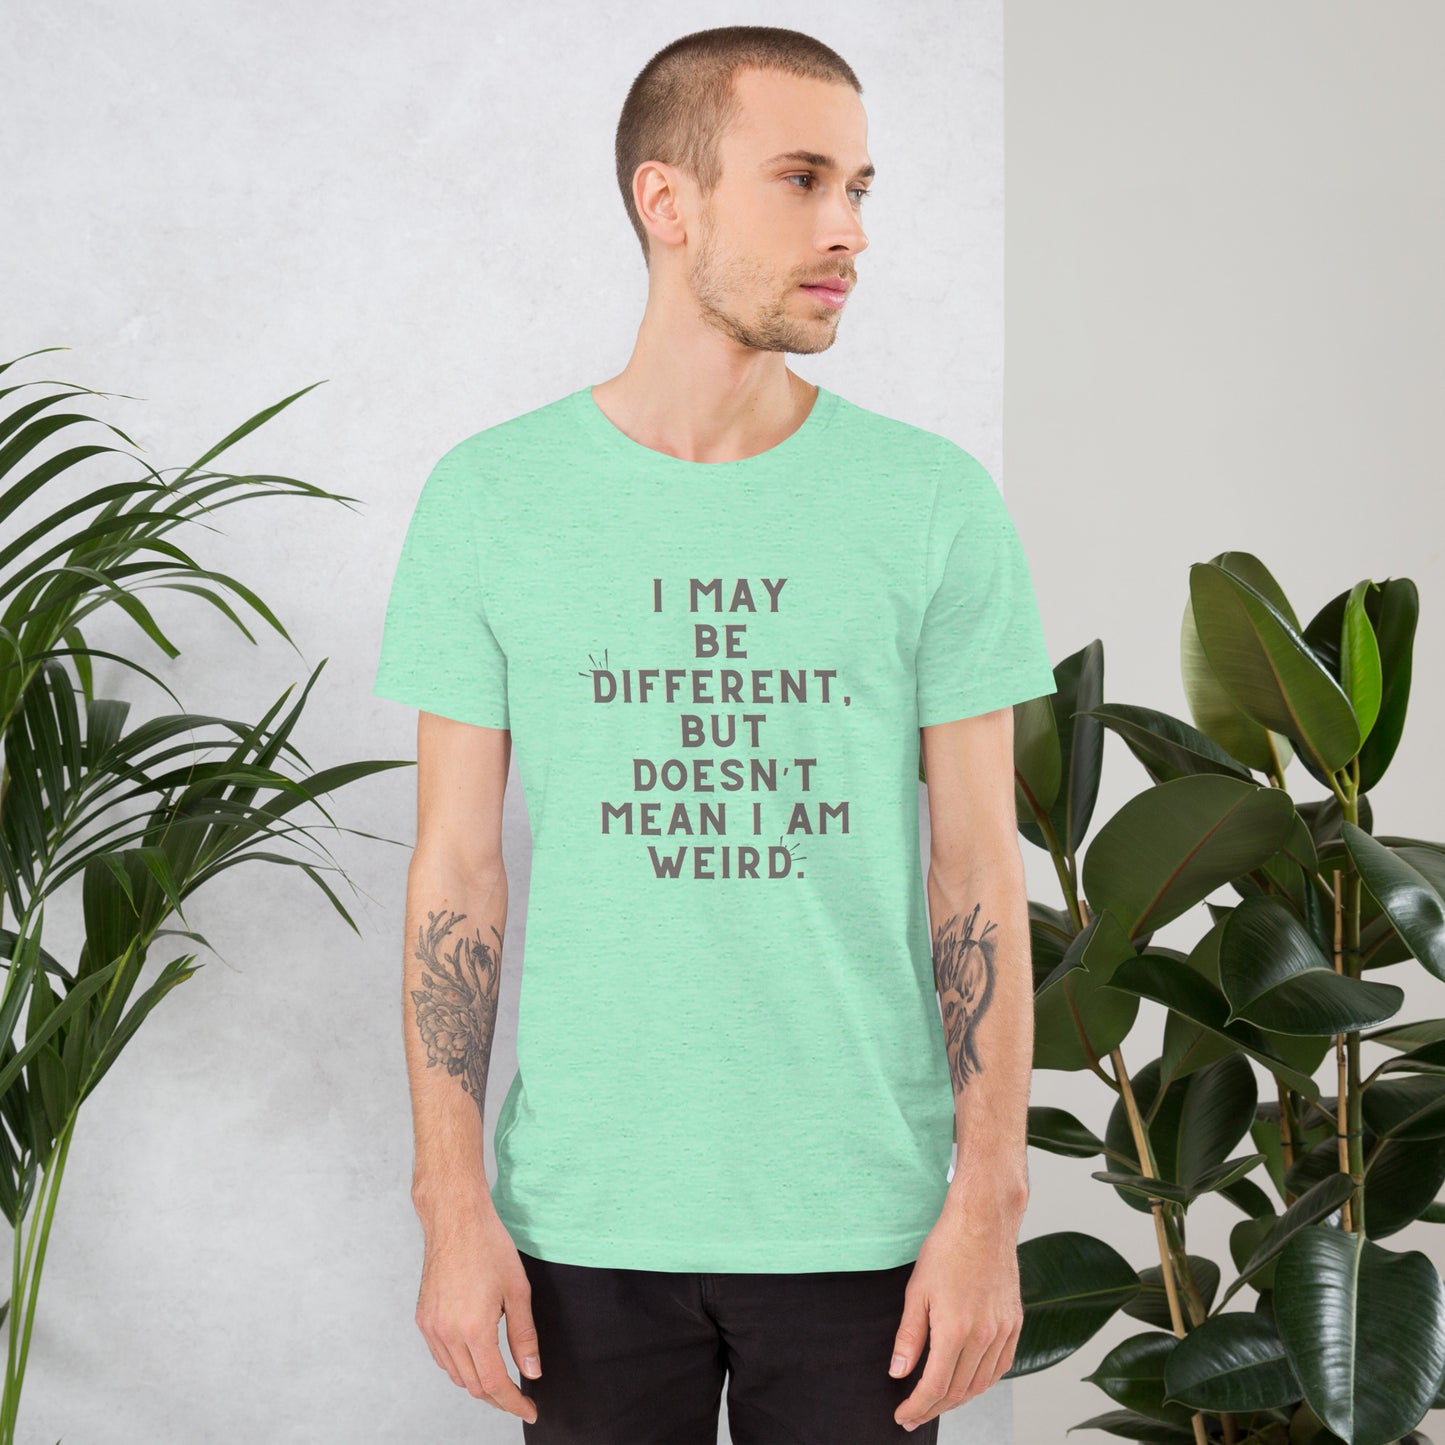 Graphics t-shirt, Unisex, Quote, Inspirational, Space, Individuality, Acceptance, Confidence, Different, Challenge, Juxtaposition, Uplifting